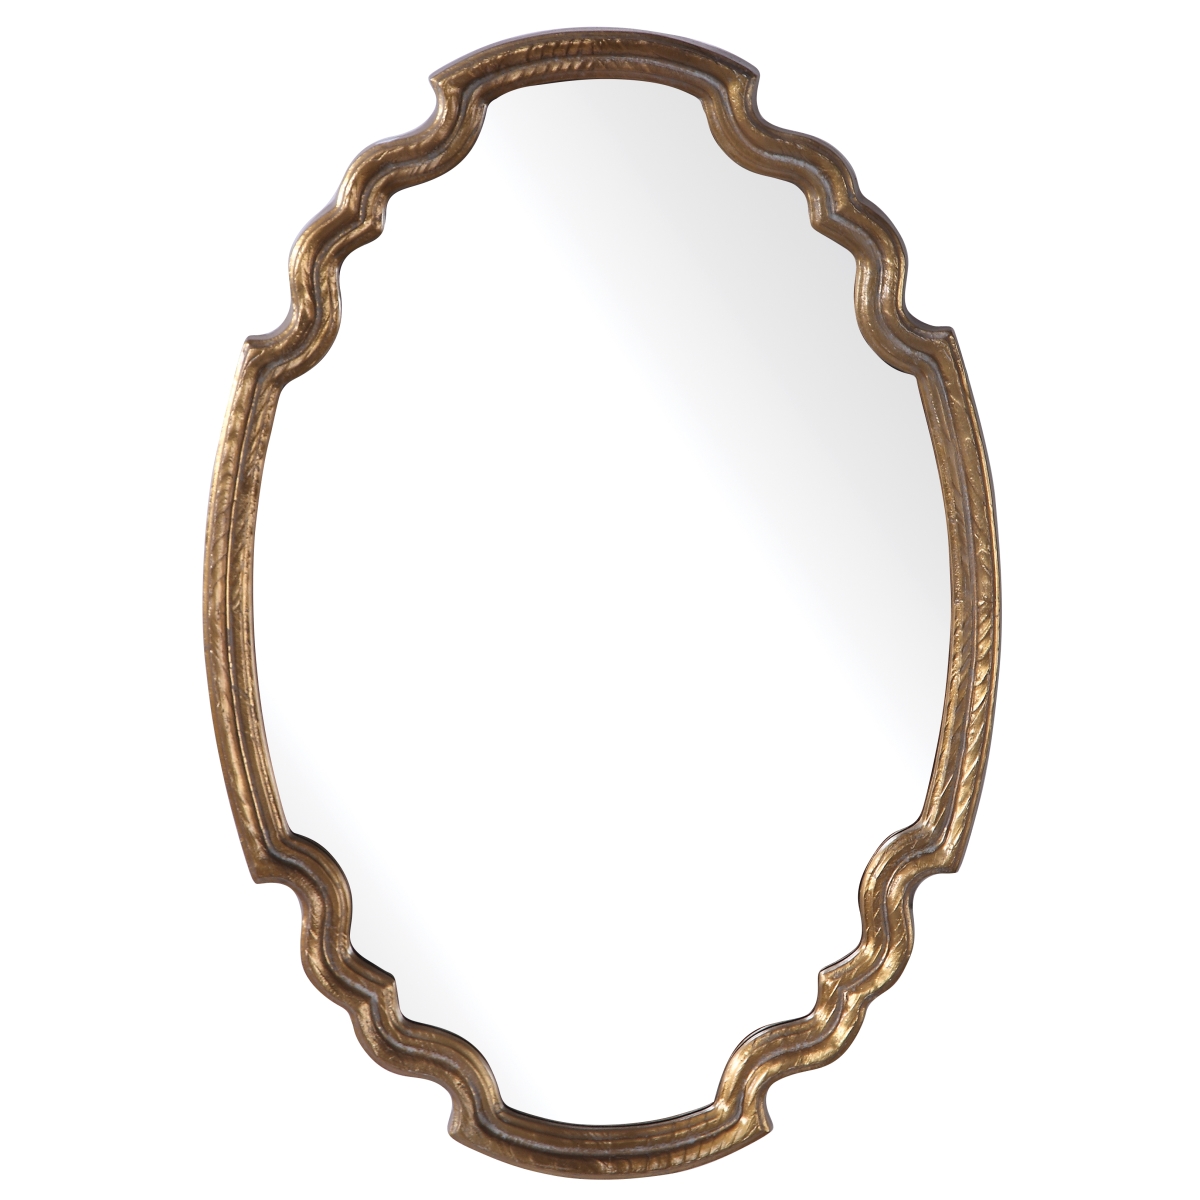 Picture of 212 Main 09584 Ariane Gold Oval Mirror